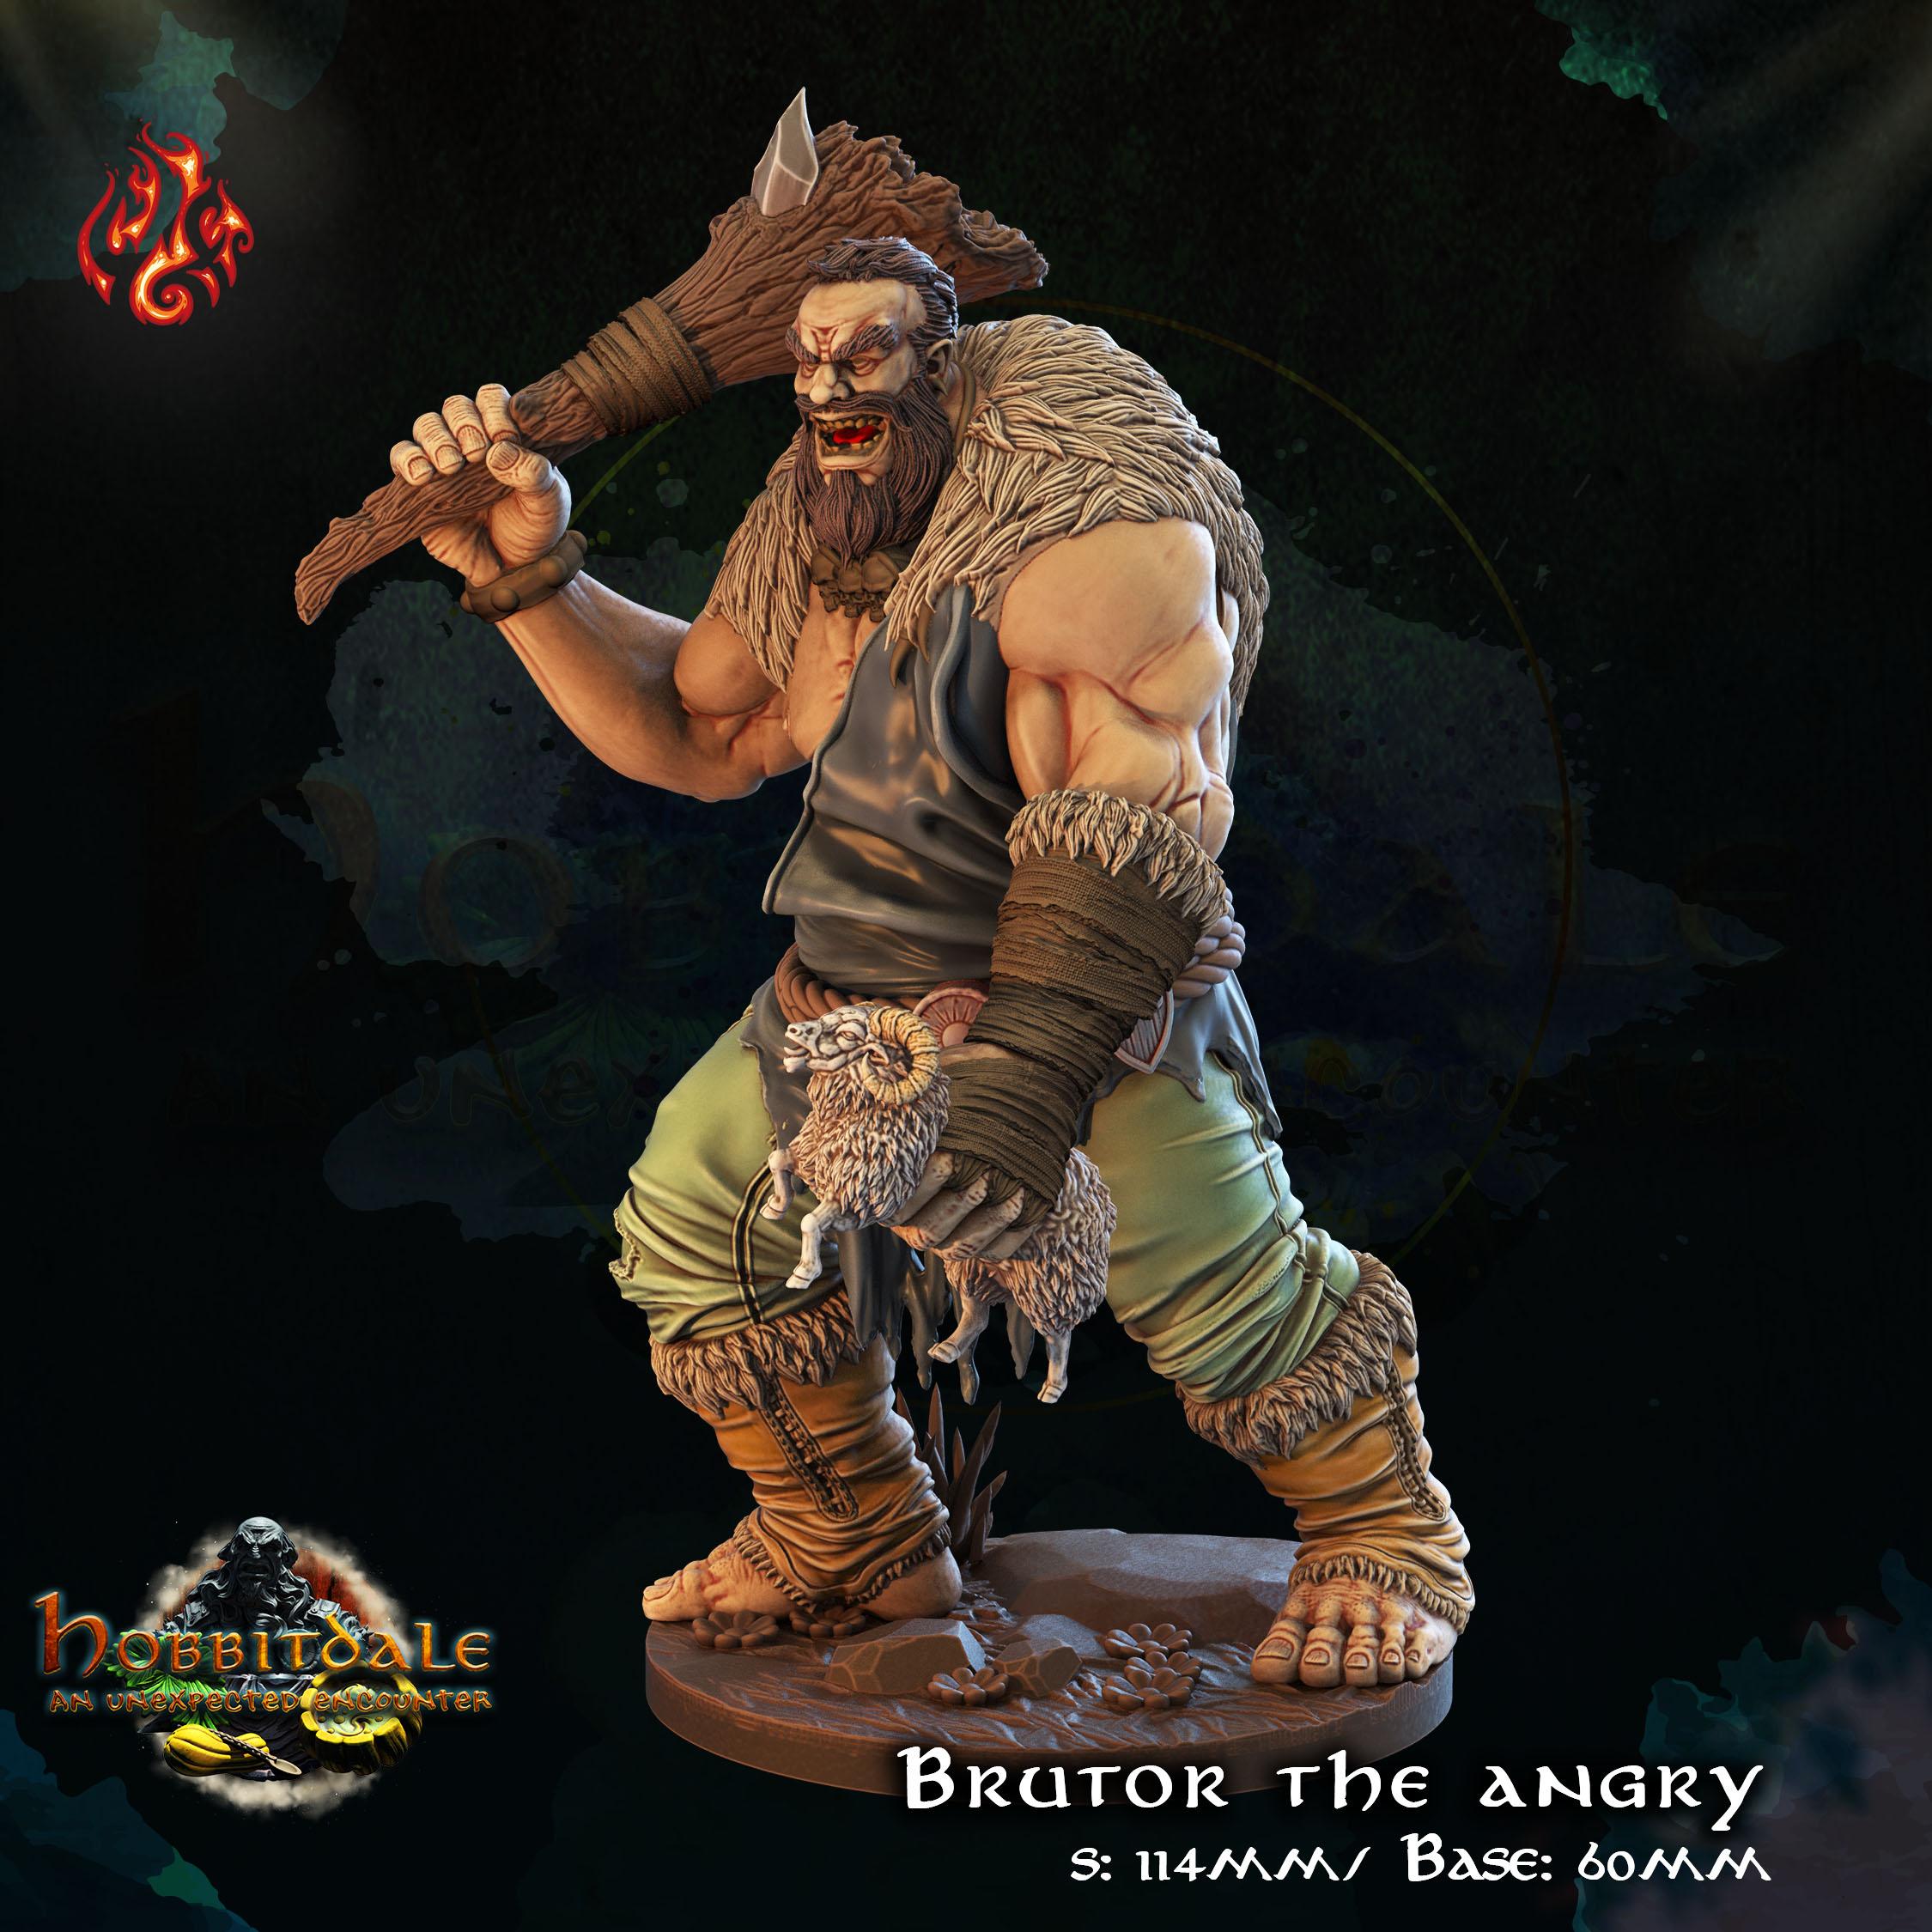 Brutor the Angry 3d model